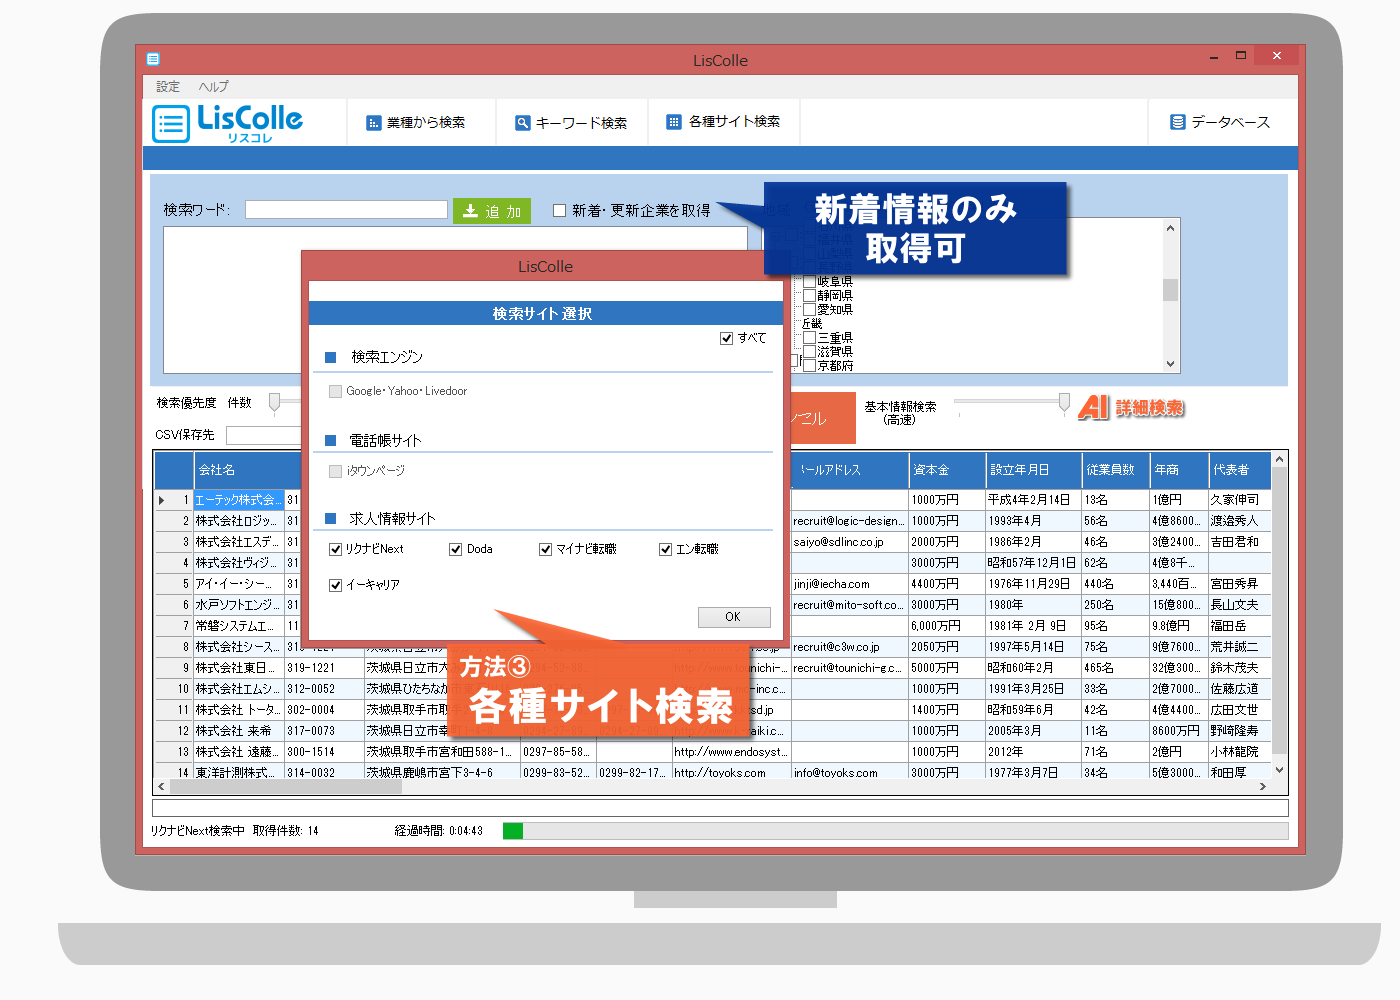 LisColle「リスコレ」サイト検索